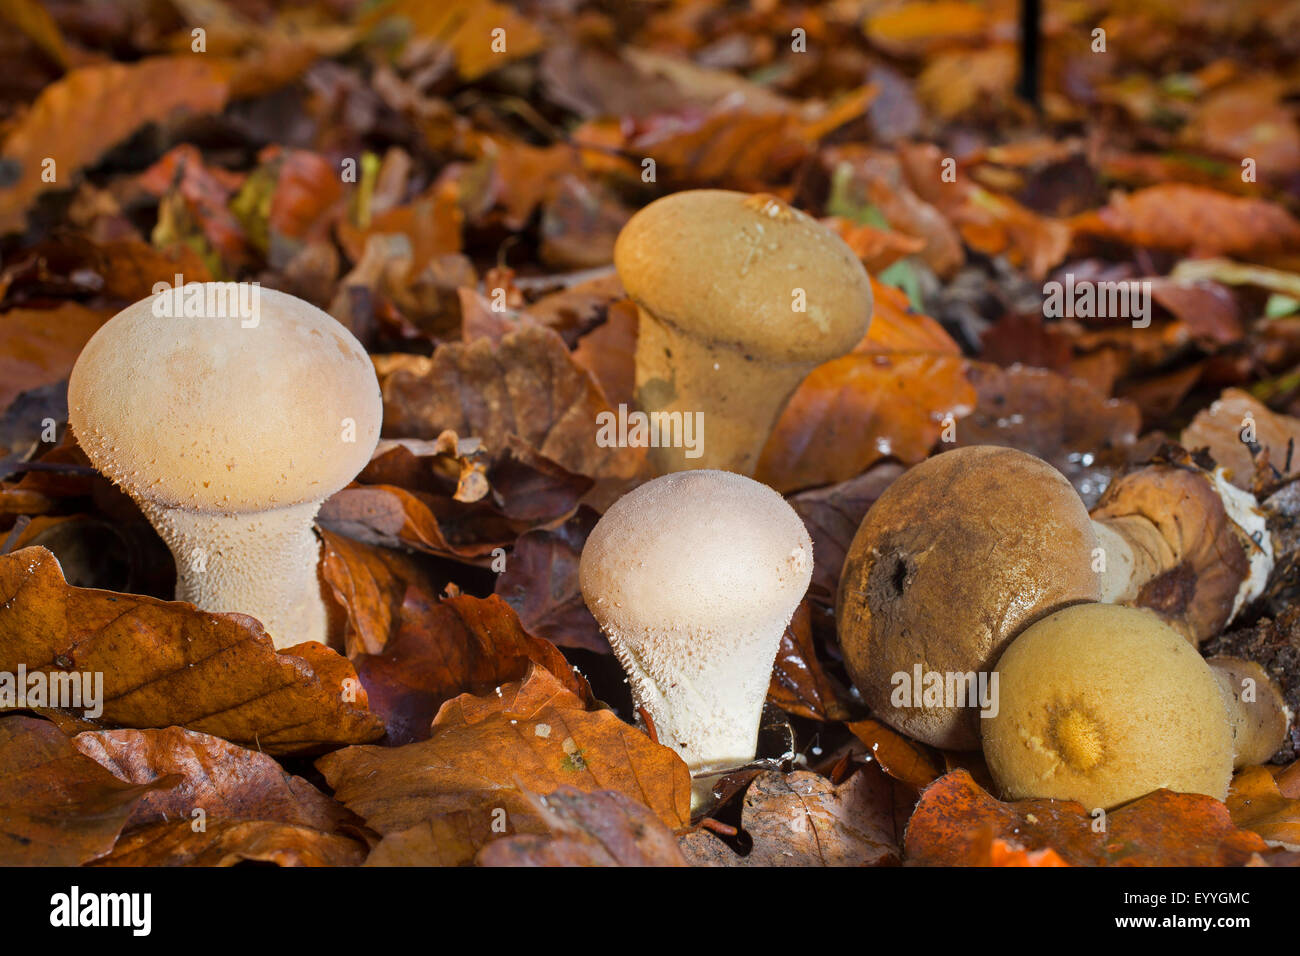 Pestle puffball (Lycoperdon excipuliforme, Calvatia excipuliformis, Calvatia saccata, Handkea excipuliformis), between autumn leaves, Germany Stock Photo